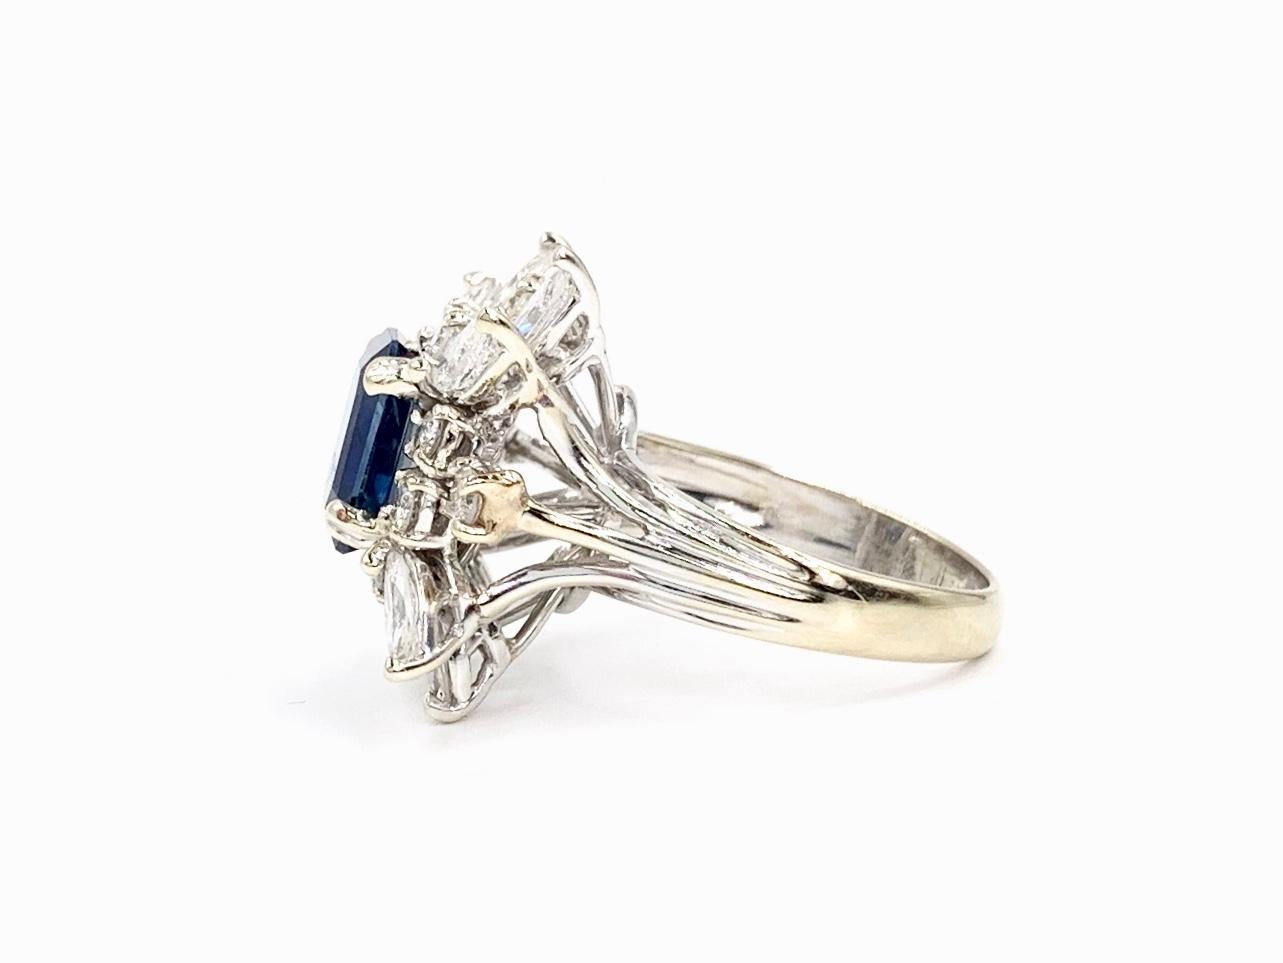 Vintage White Gold 2.80 Carat Sapphire and Diamond Cocktail Ring In Good Condition For Sale In Pikesville, MD